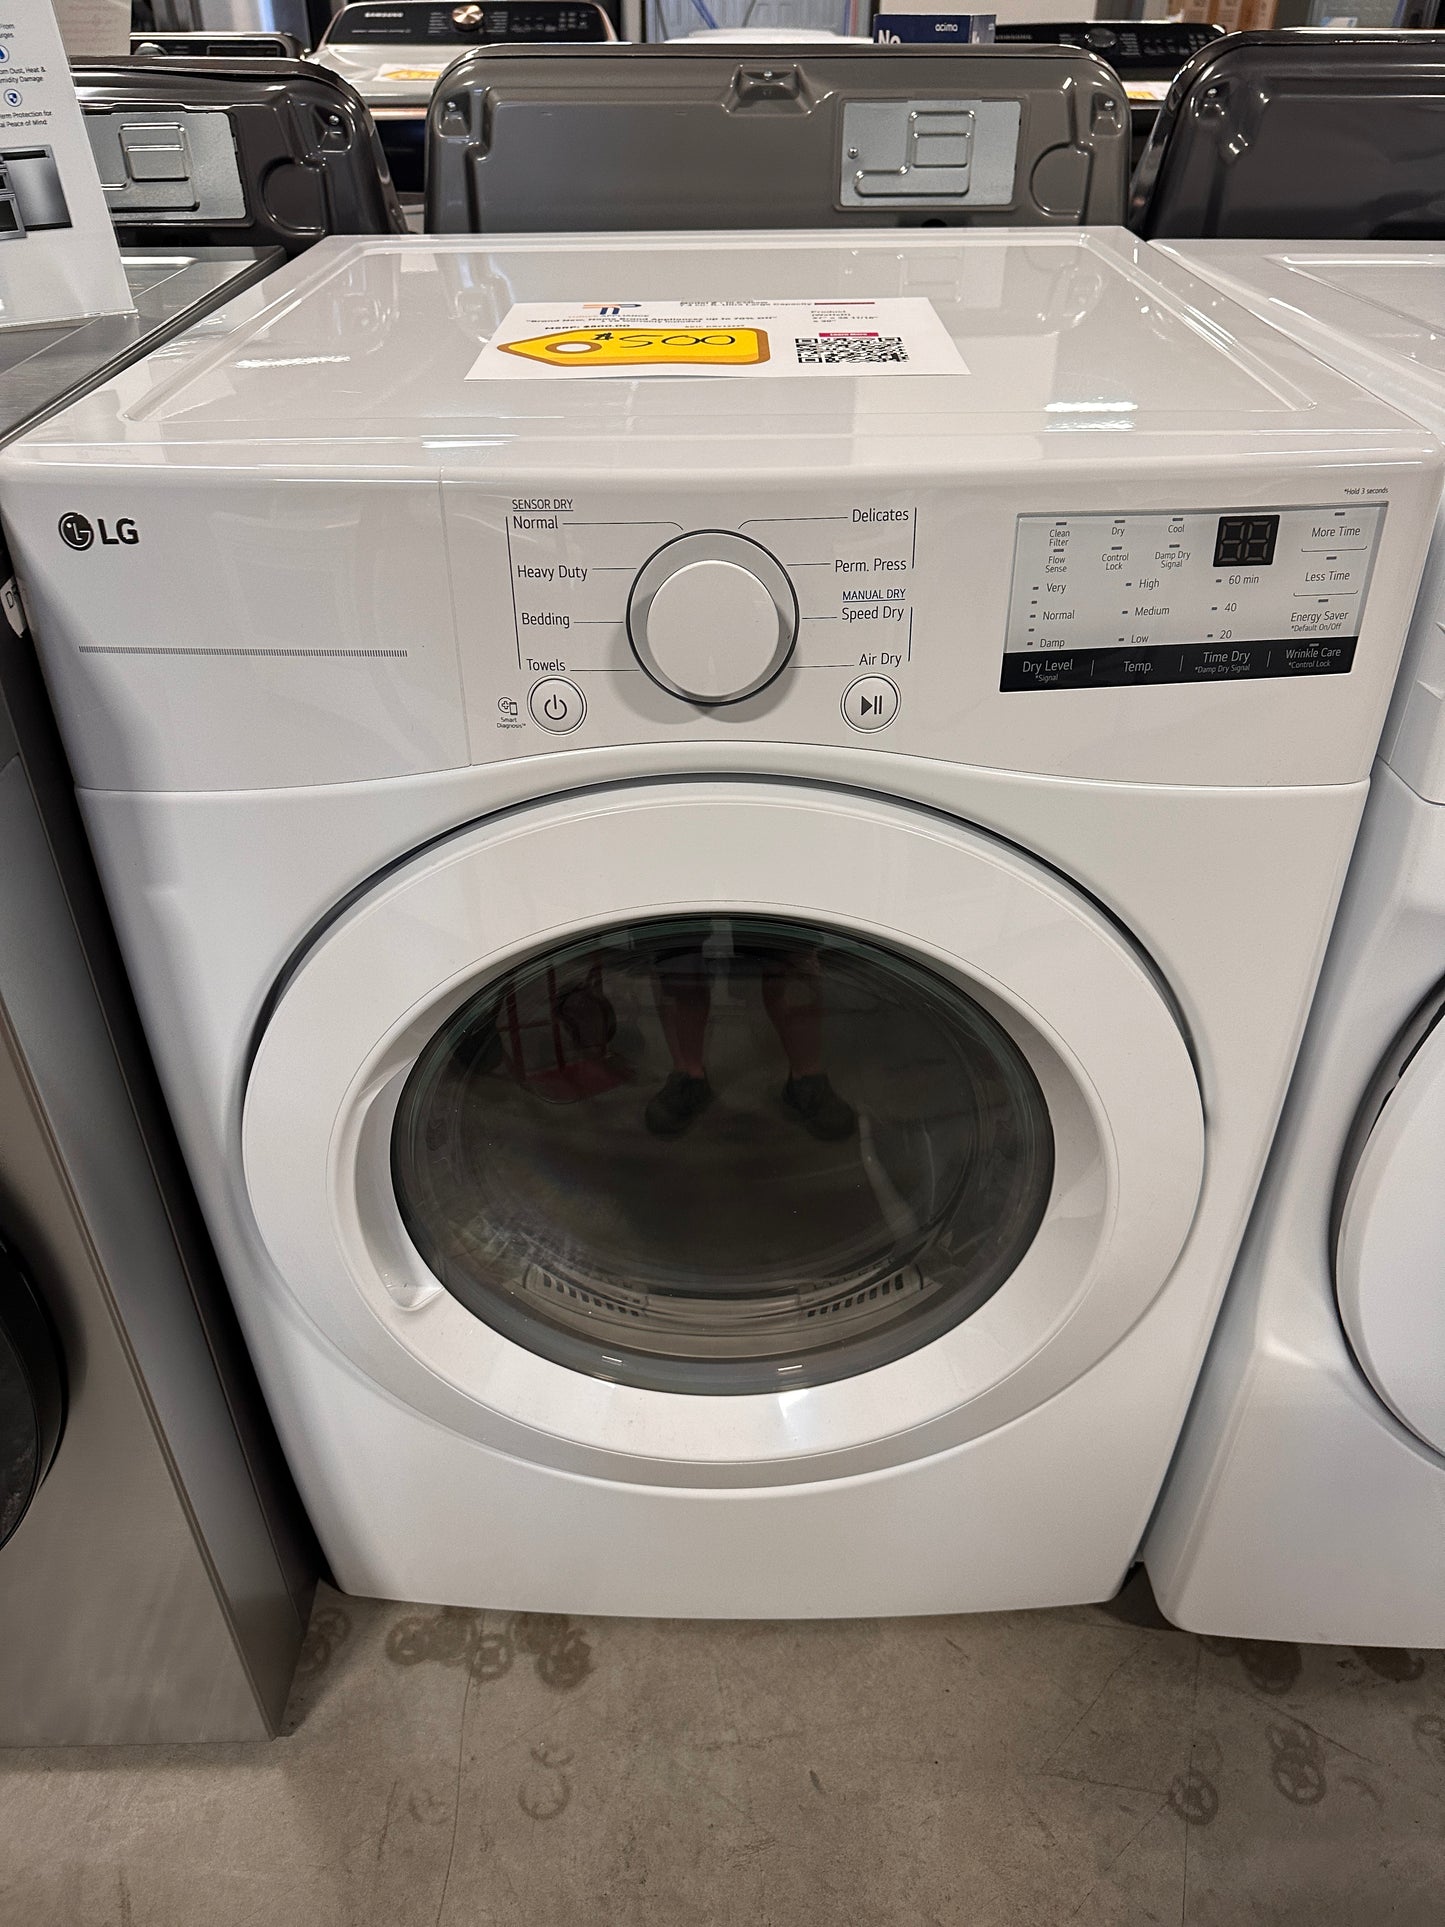 LG - 7.4 Cu. Ft. Stackable Electric Dryer with FlowSense - White  Model:DLE3400W  DRY12329